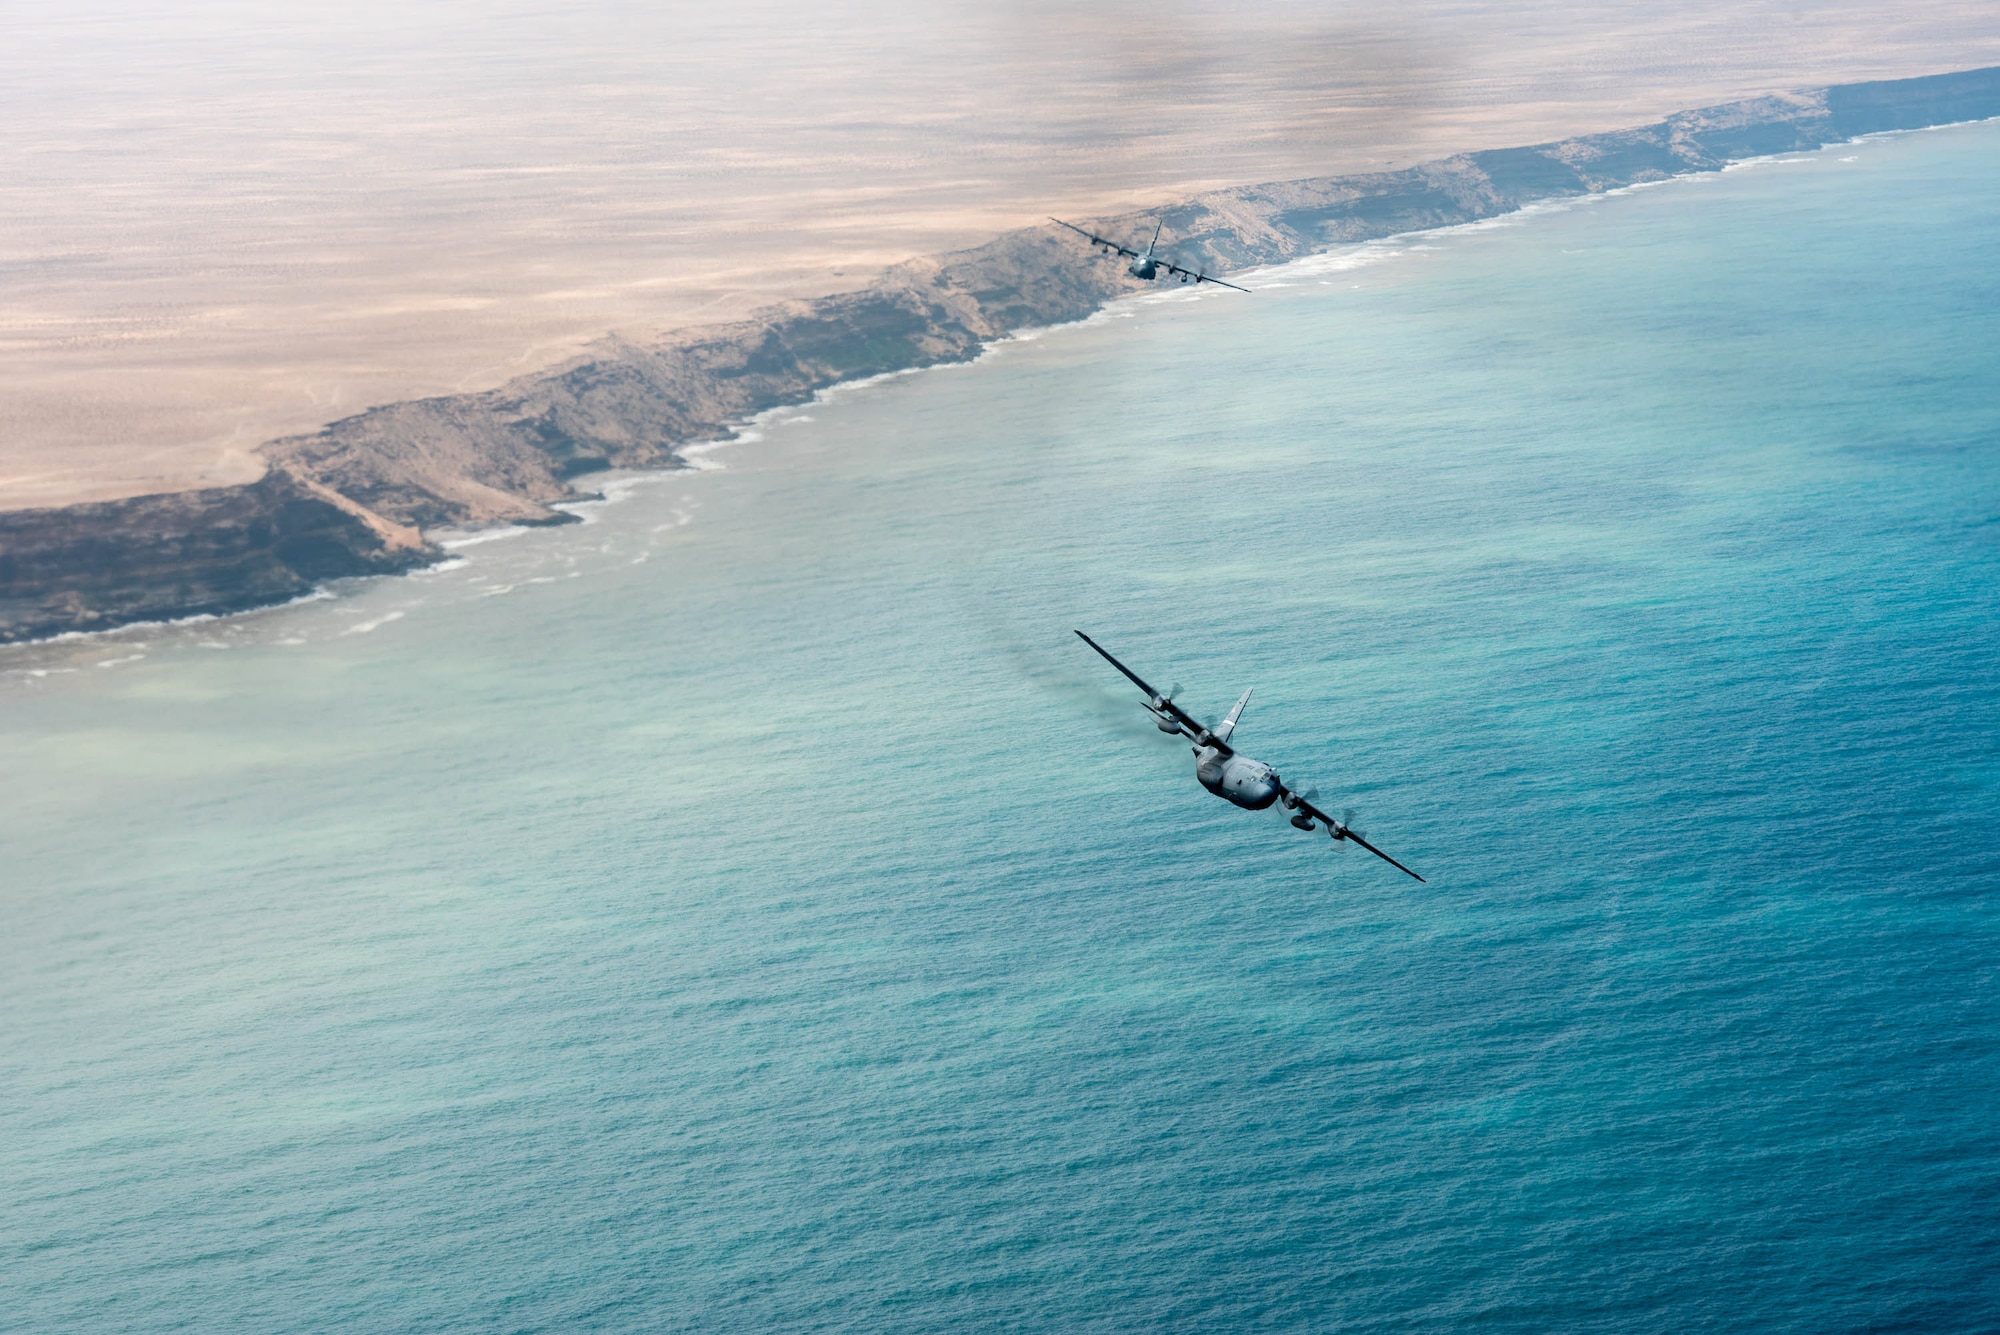 This photo, depicting a Kentucky Air National Guard C-130 Hercules aircraft flying over the coast of North Africa, was part of a group of images that won first place for Training Photo Series in the 2017 National Guard Bureau Media Contest. (U.S. Air National Guard photo by Master Sgt. Phil Speck)